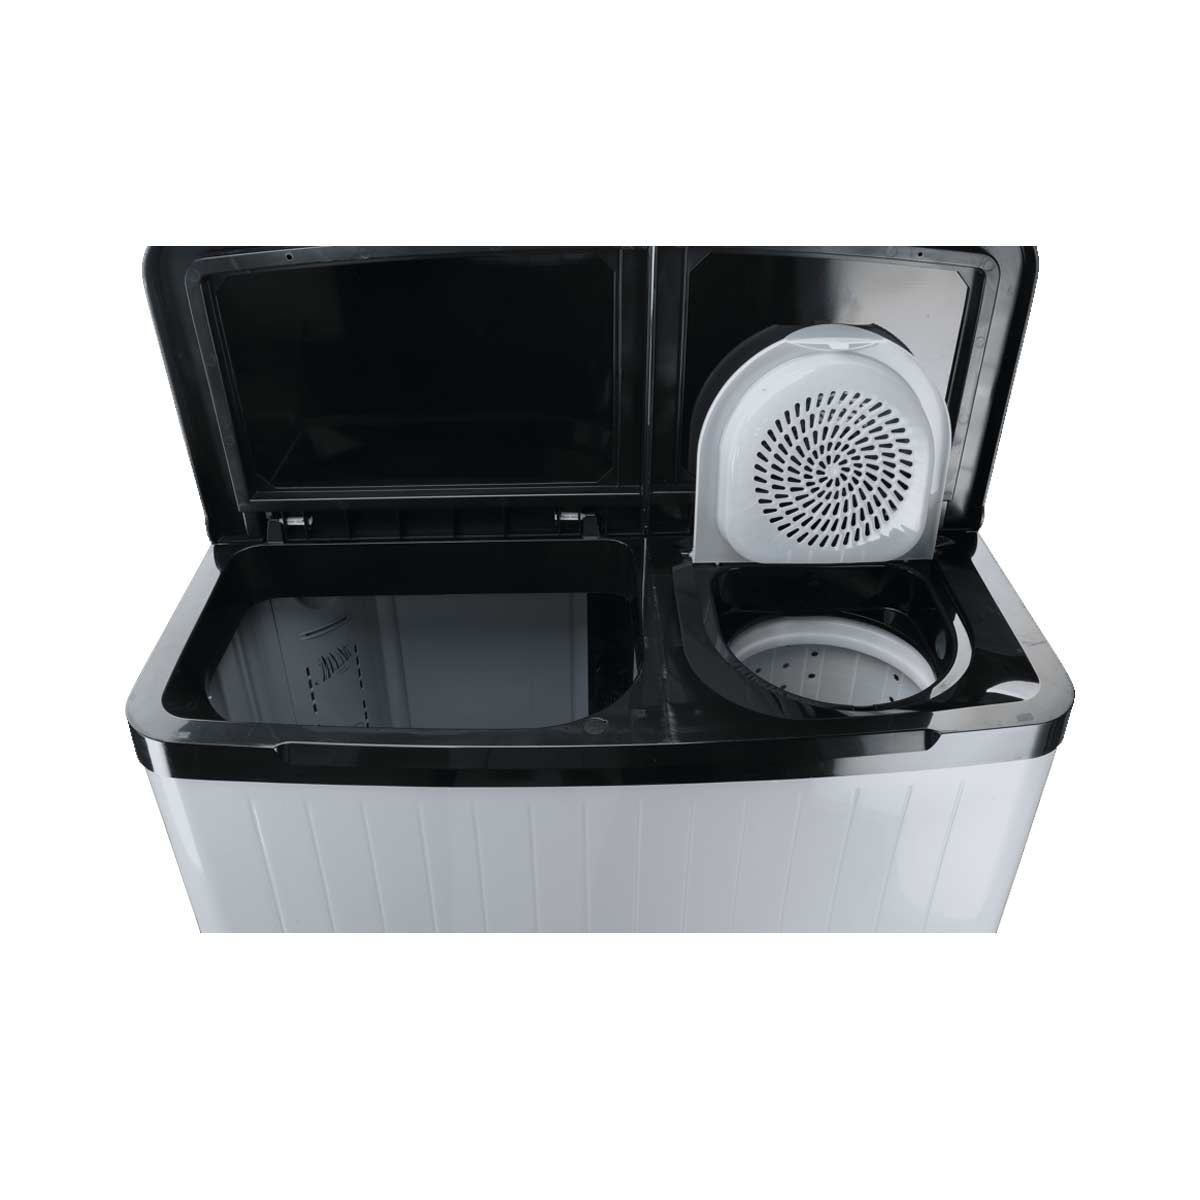 Dawlance-Wash-and-Spin-Twin-Tub-DW-7500-Glass